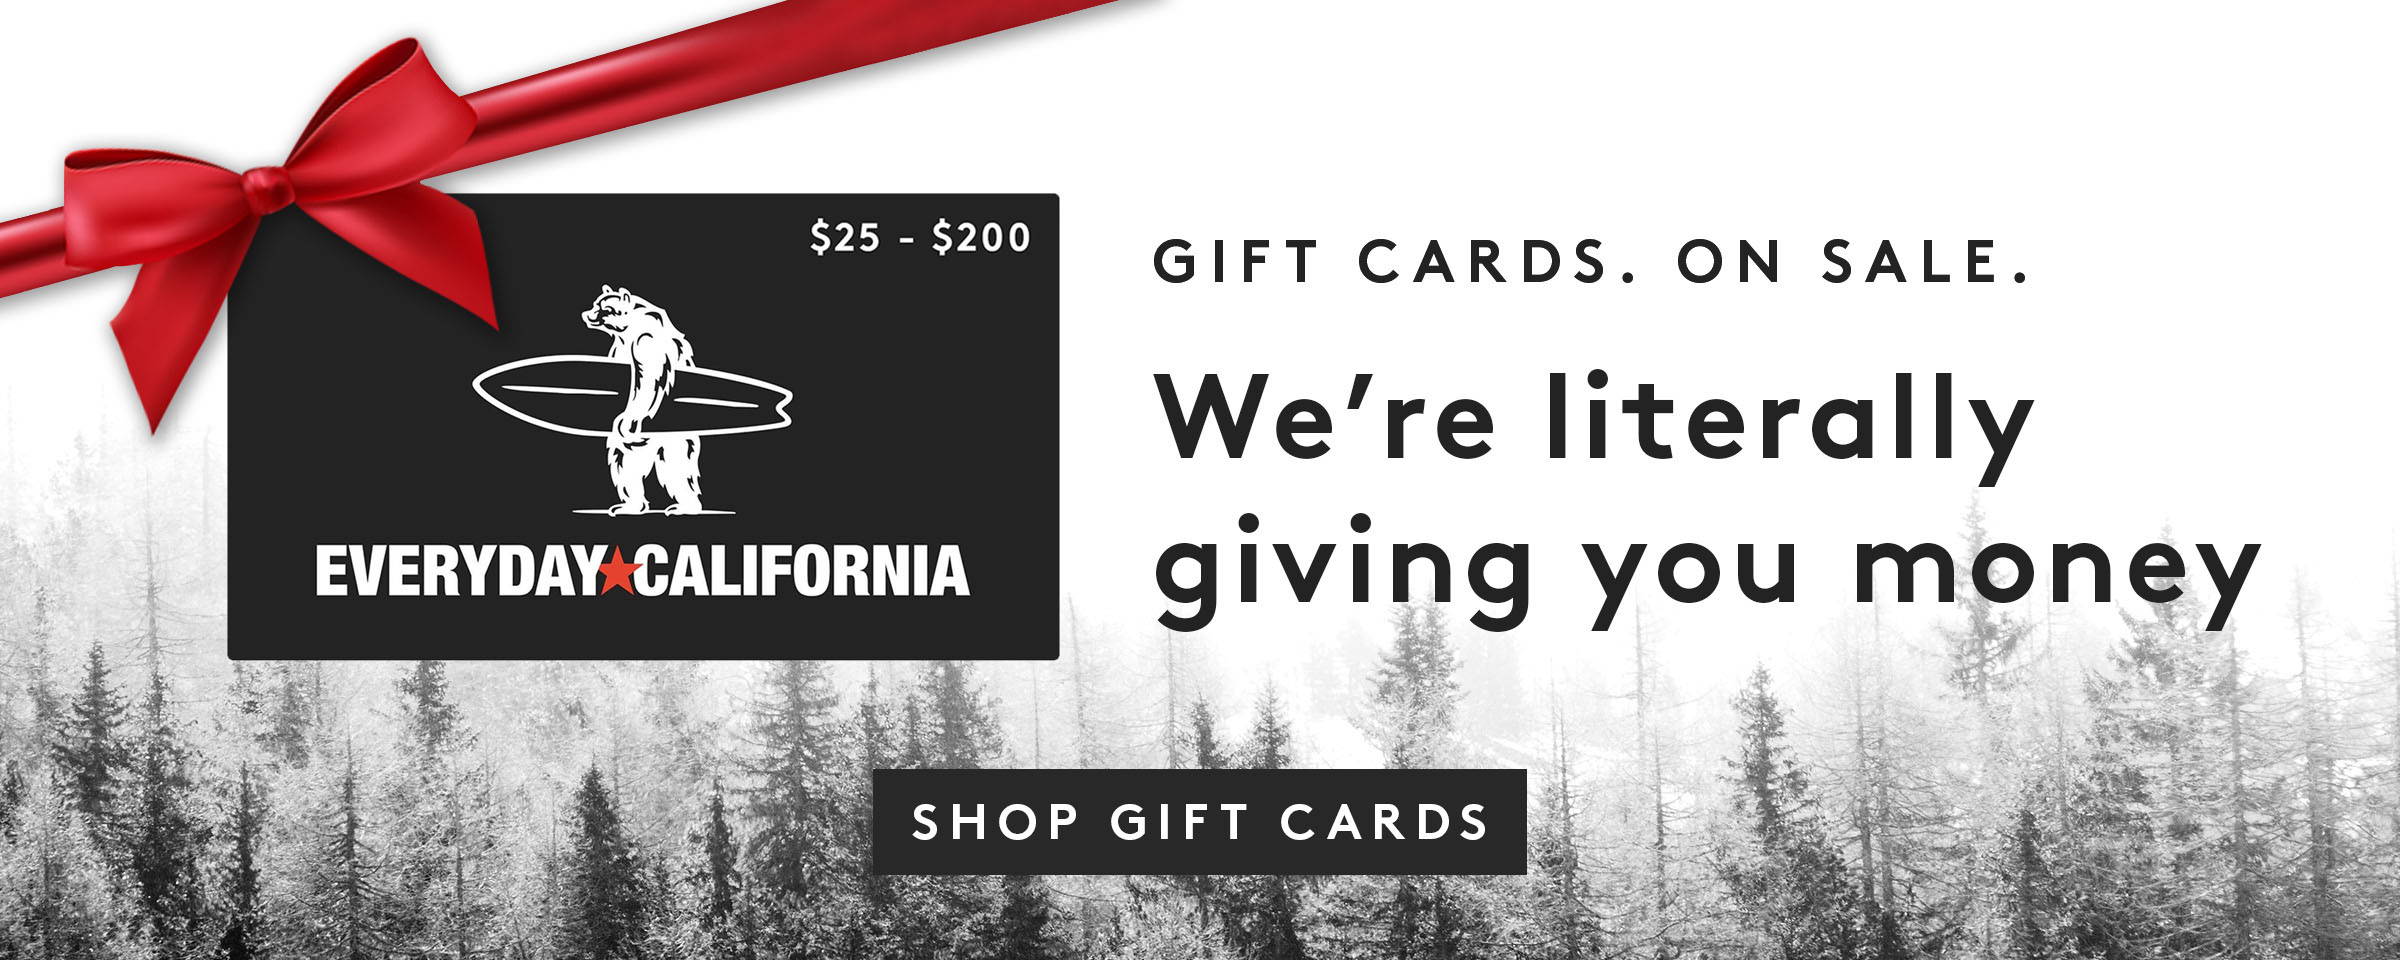 Gift Cards. On Sale. We're literally giving you money. Shop Gift Cards.